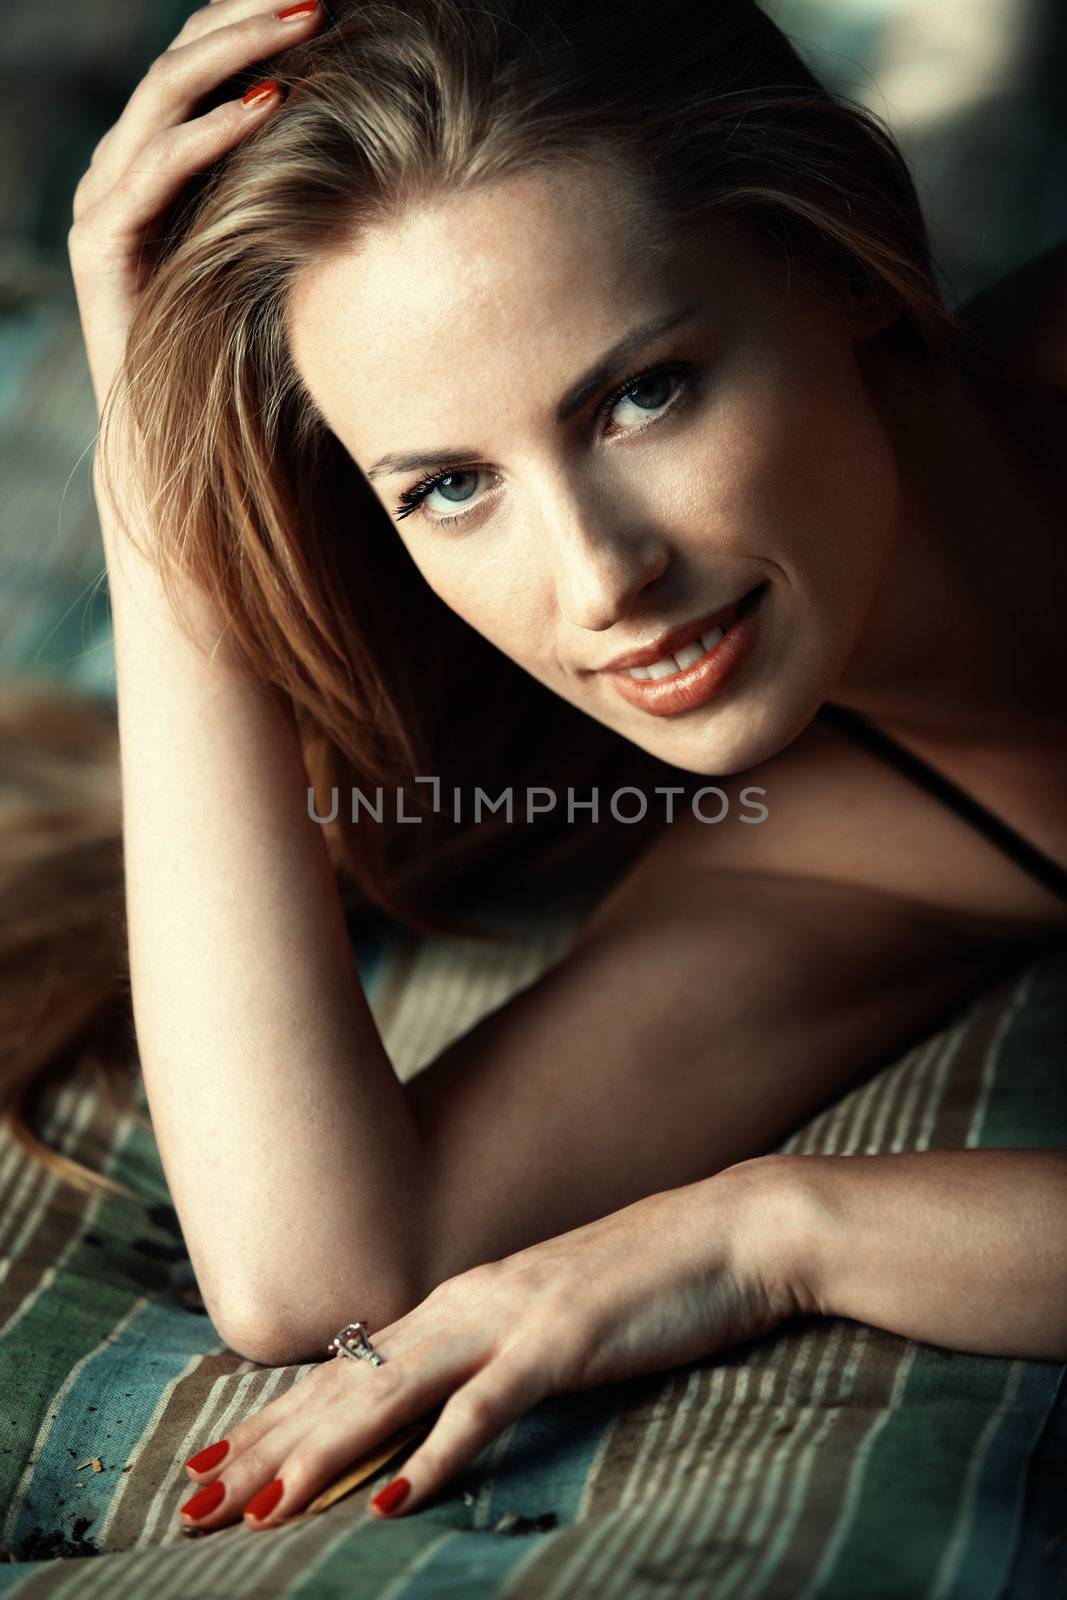 Beautiful smiling lady outdoors laying on a bedding. Close-up